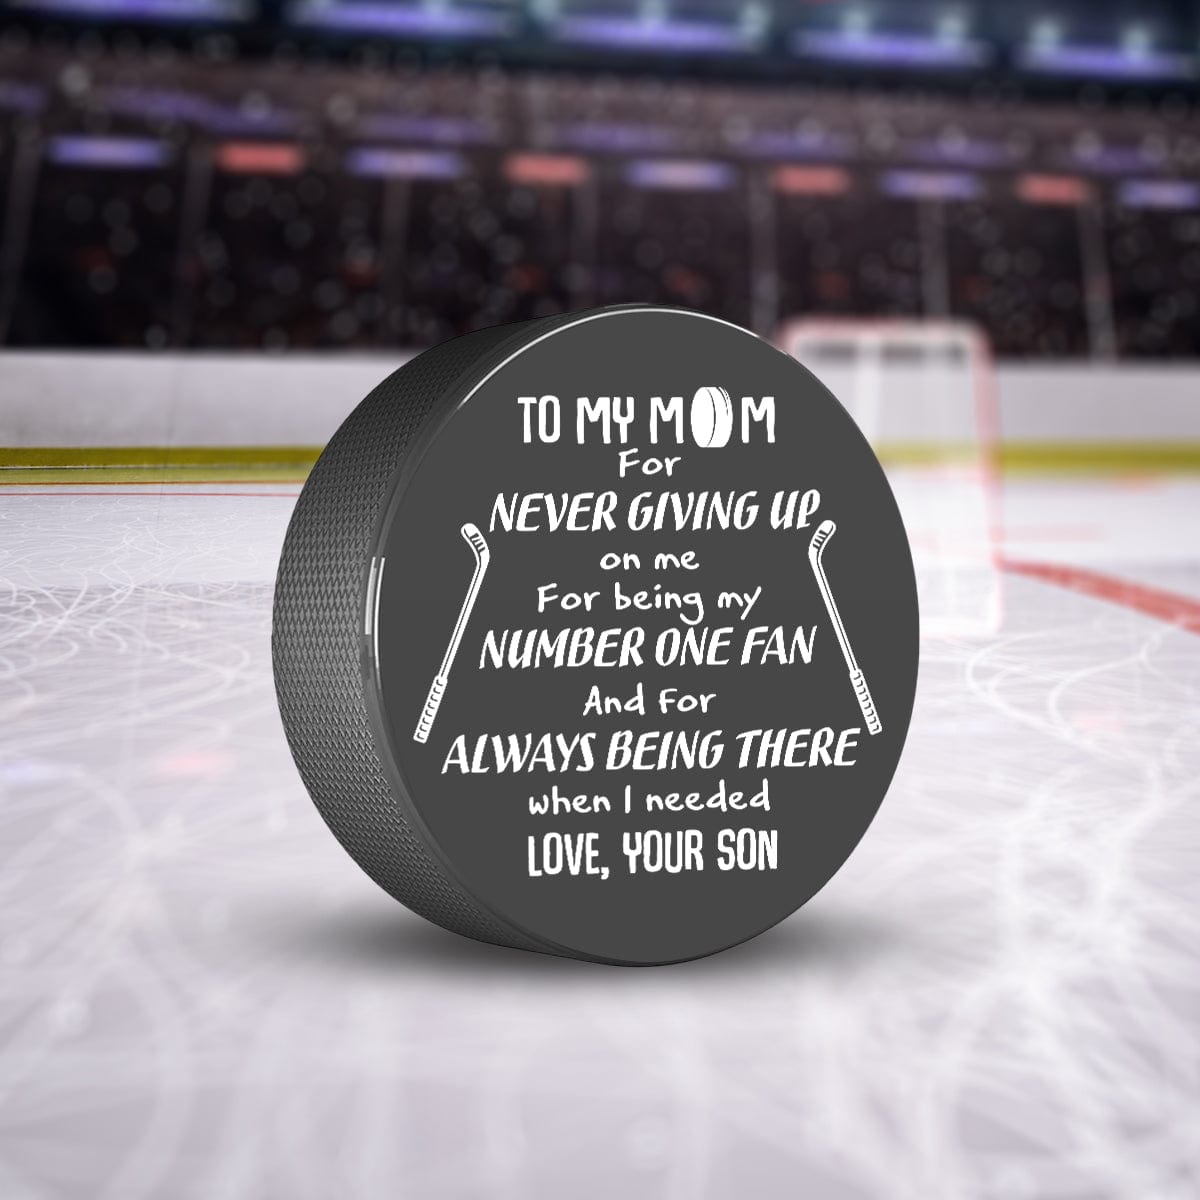 Personalized Hockey Puck - Hockey - To My Mom - From Son - For Always Being There - Gai19006